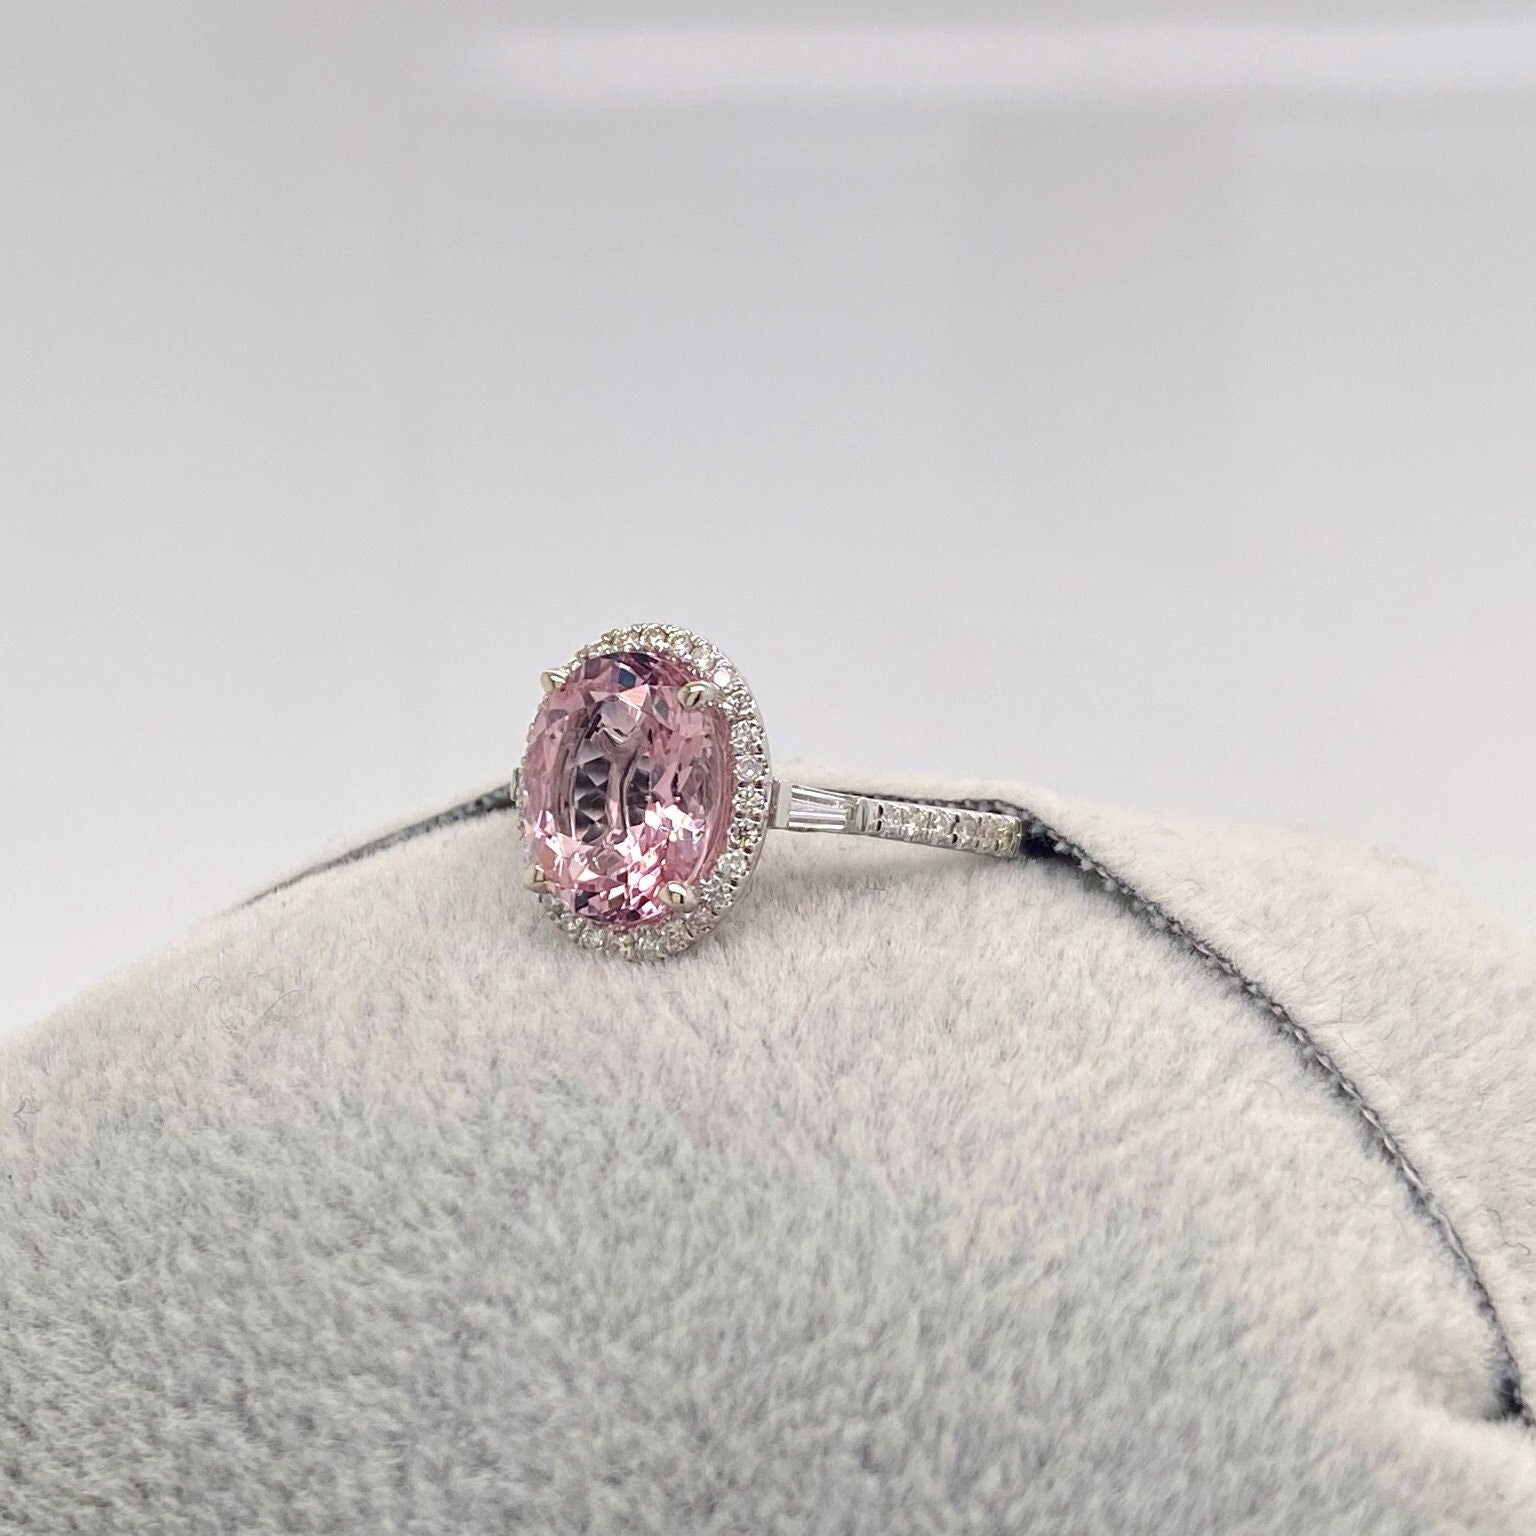 Pink Morganite Diamond Halo Ring in Solid 14K White Gold w Diamond Accents | Oval 10x8mm | Natural Gemstone | June Birthday | Ready to Ship!